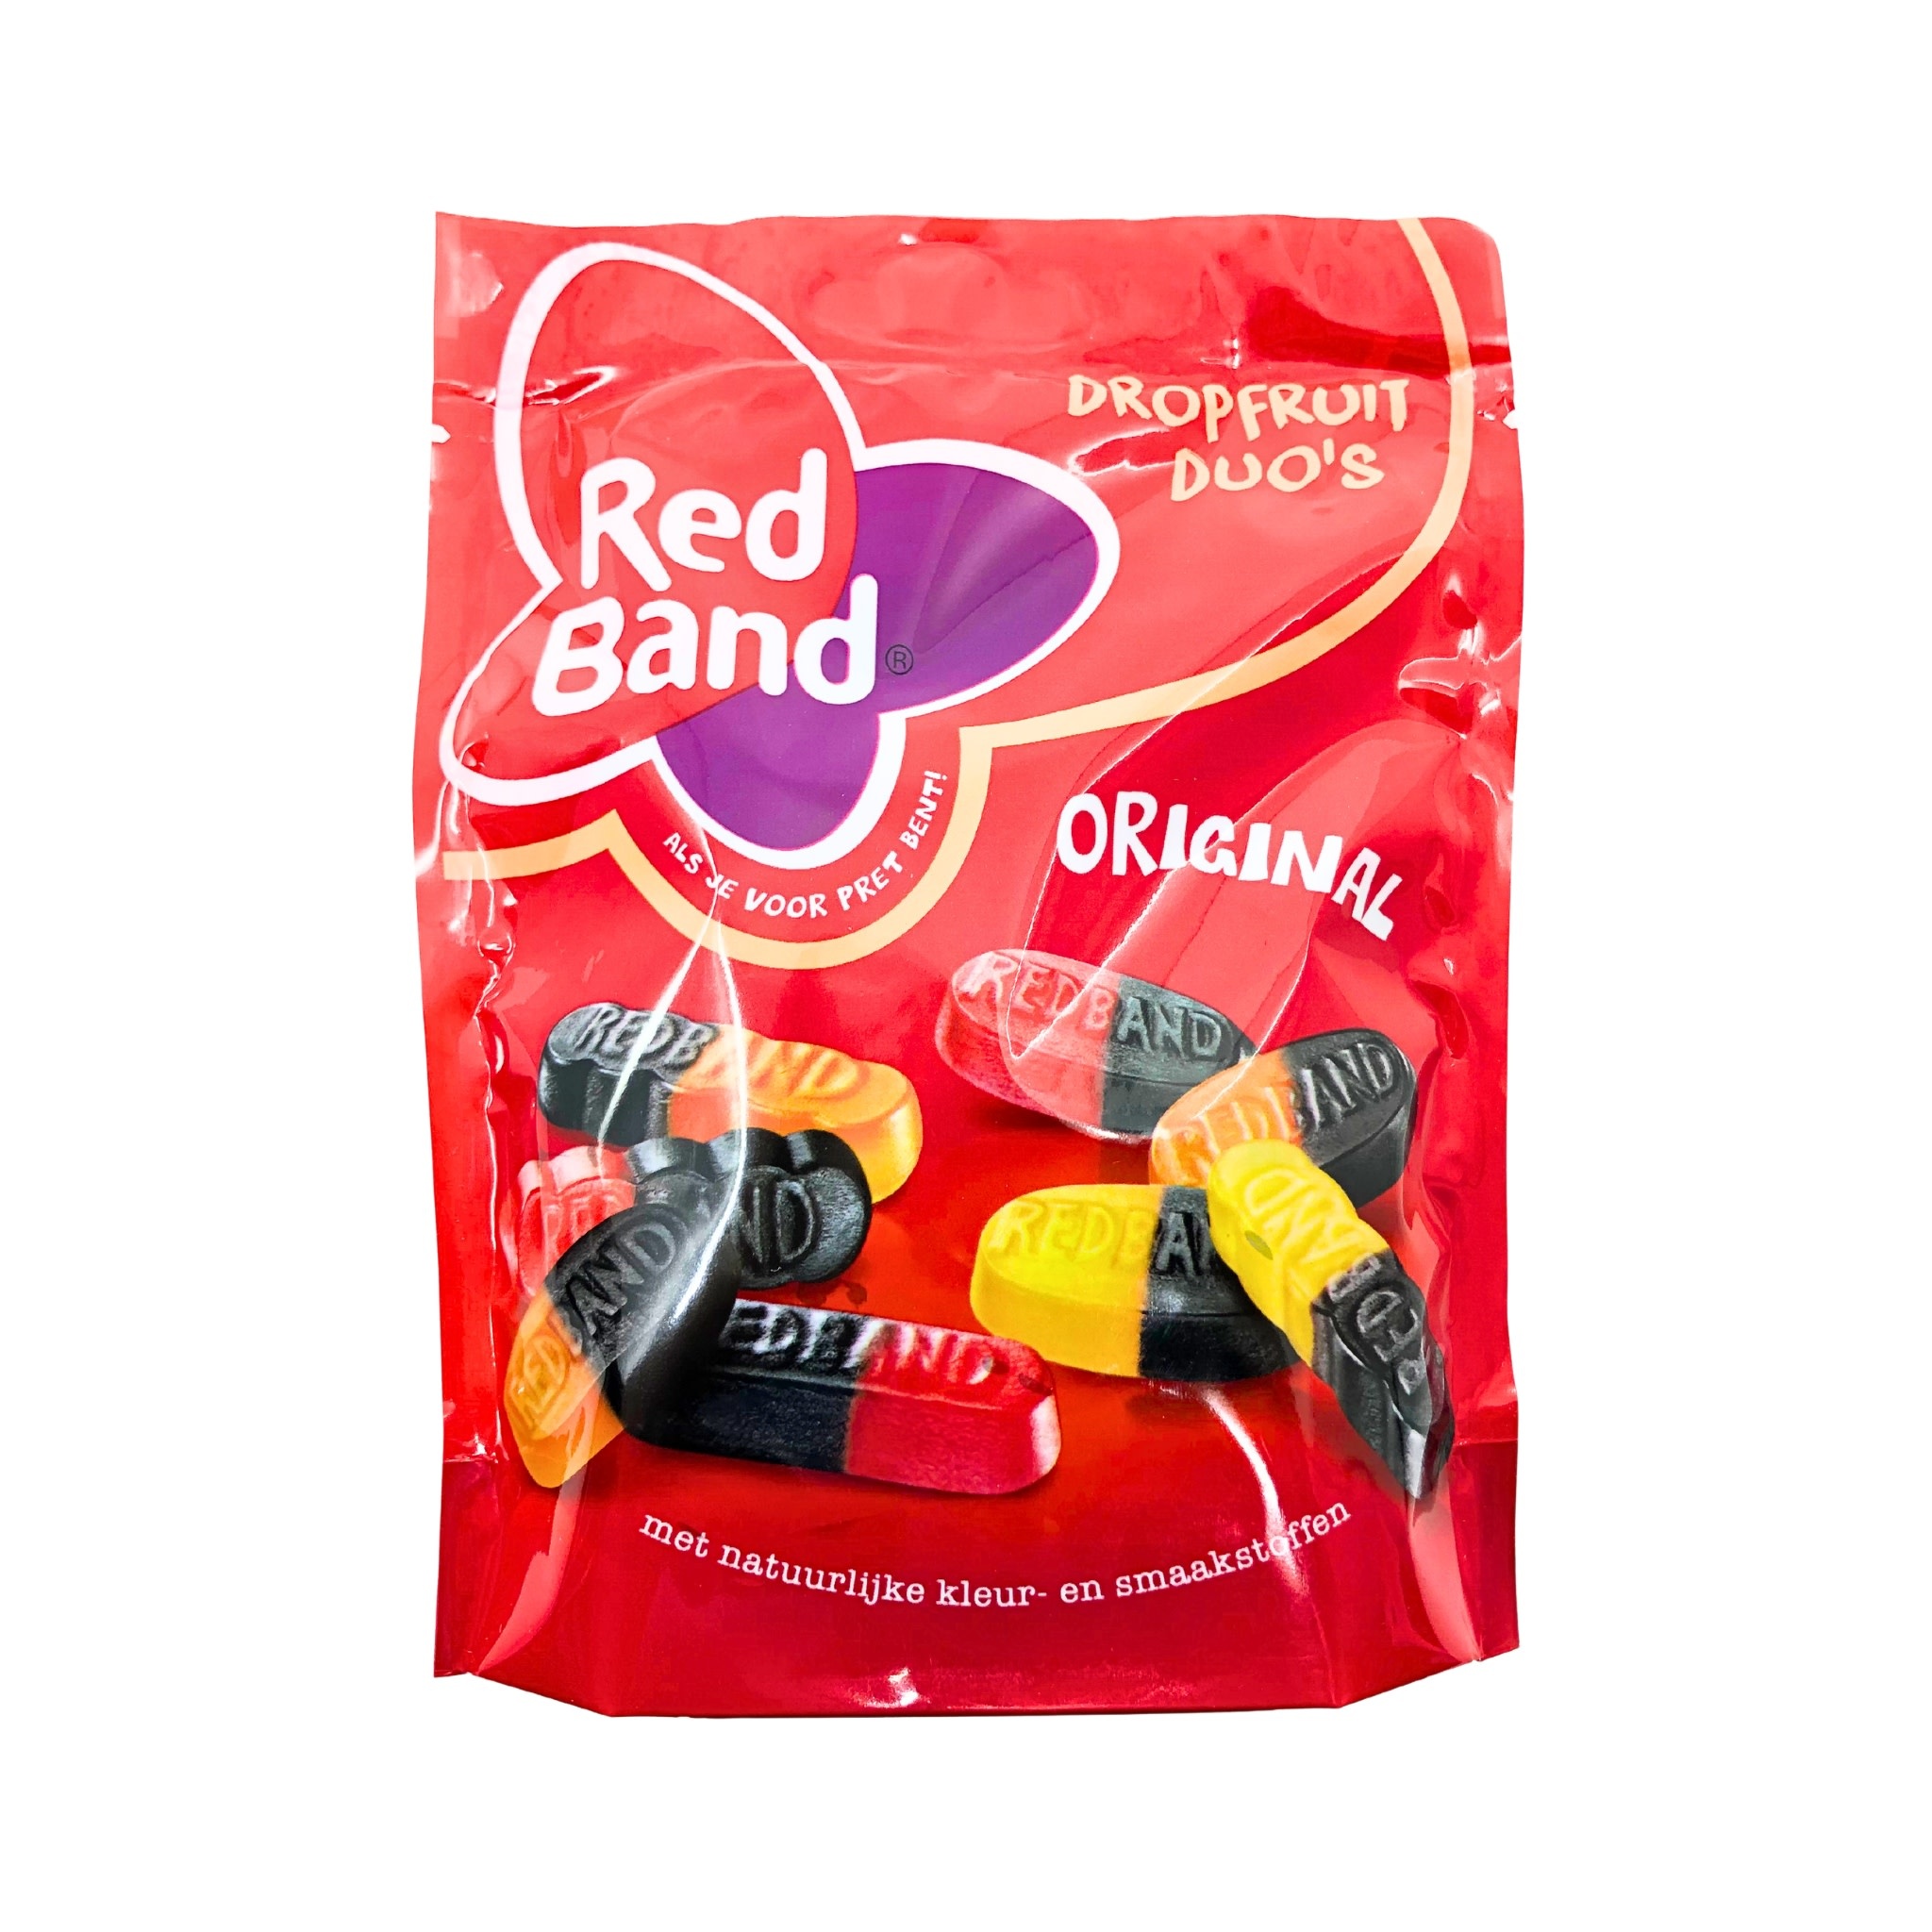 Red Band Licorice Fruit Duos